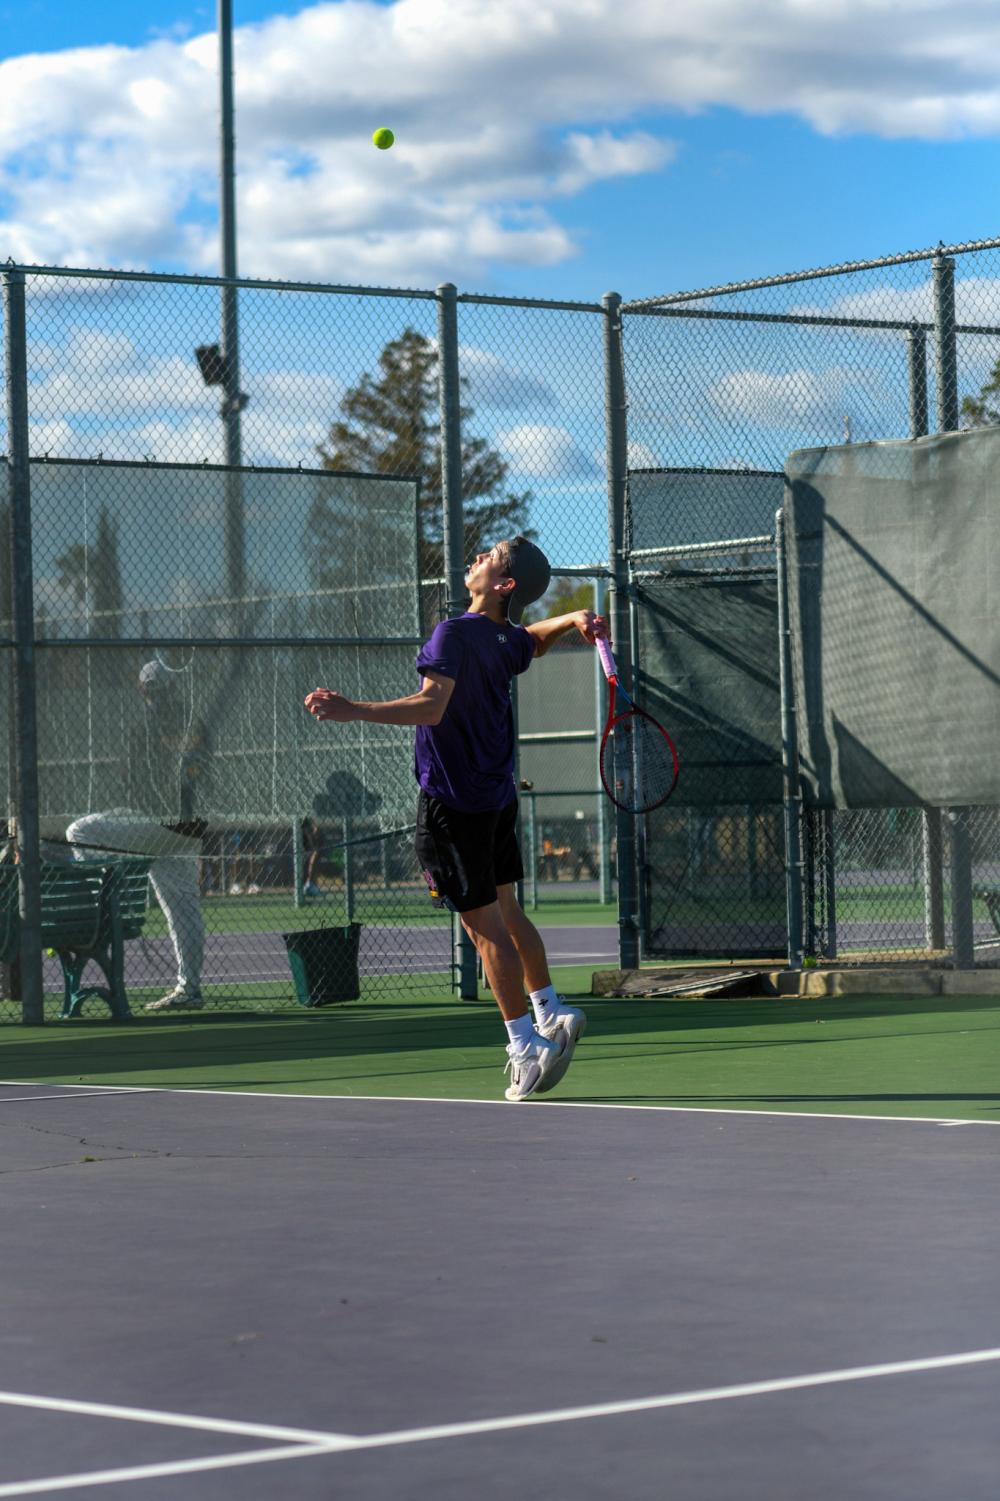 Boys+Varsity+Tennis+defeats+Foothill+in+an+exciting+6-3+victory